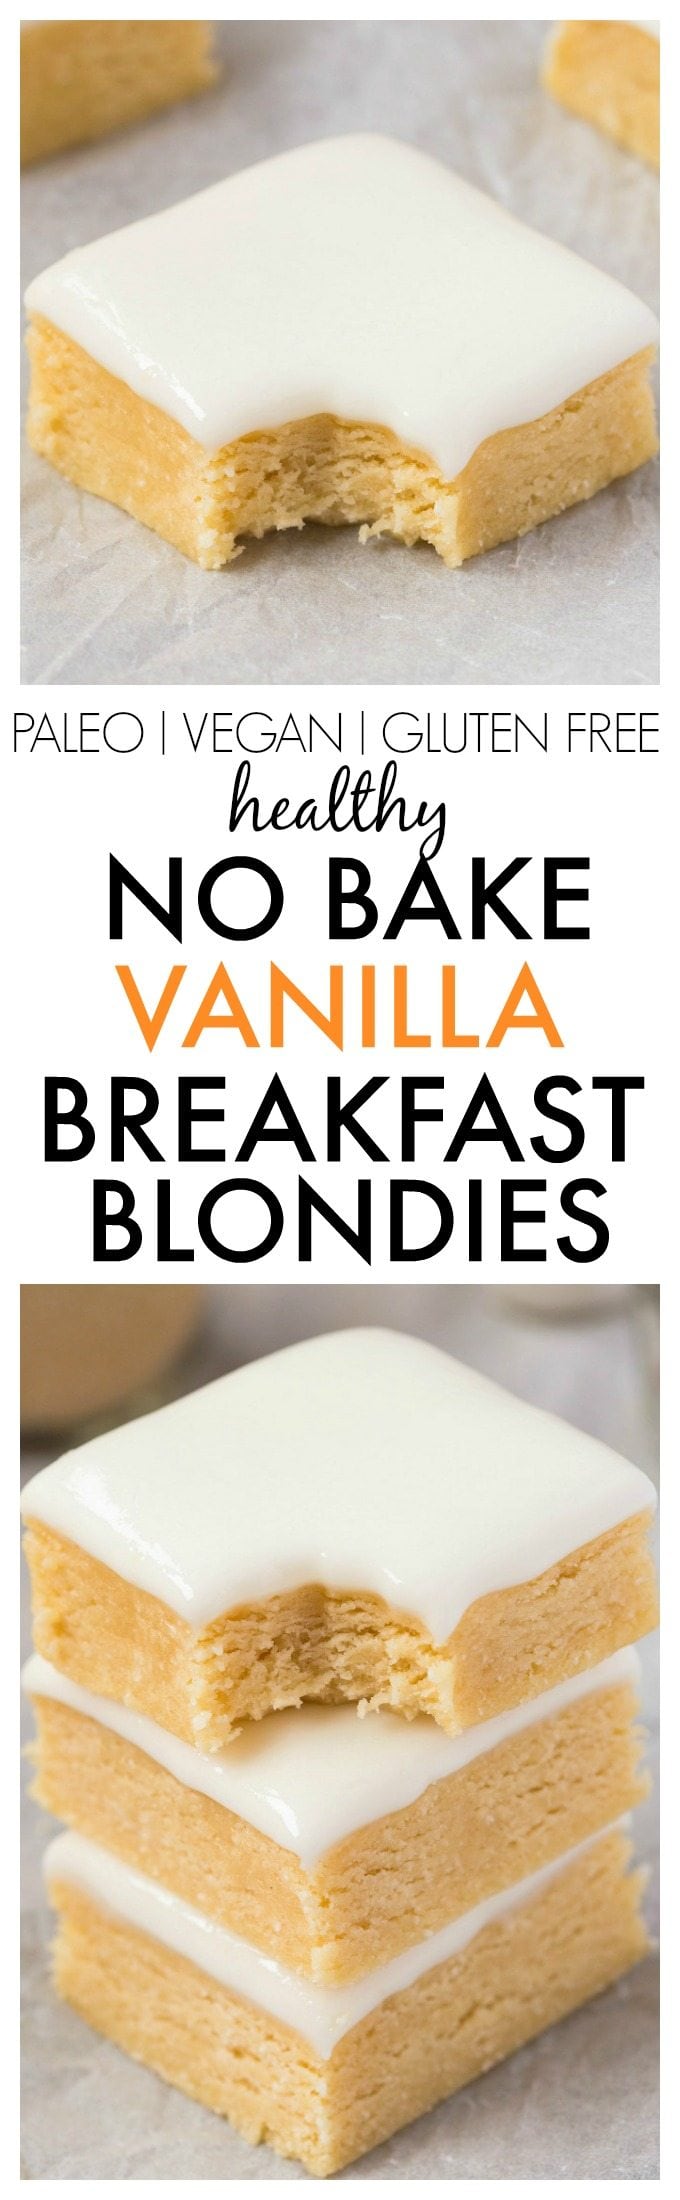 Healthy No Bake Vanilla BREAKFAST Blondies- Thick, slightly chewy and soft blondies designed for breakfast! NO butter, oil, flour or sugar, and perfect for dessert or a snack! {vegan, gluten free, paleo recipe}- thebigmansworld.com